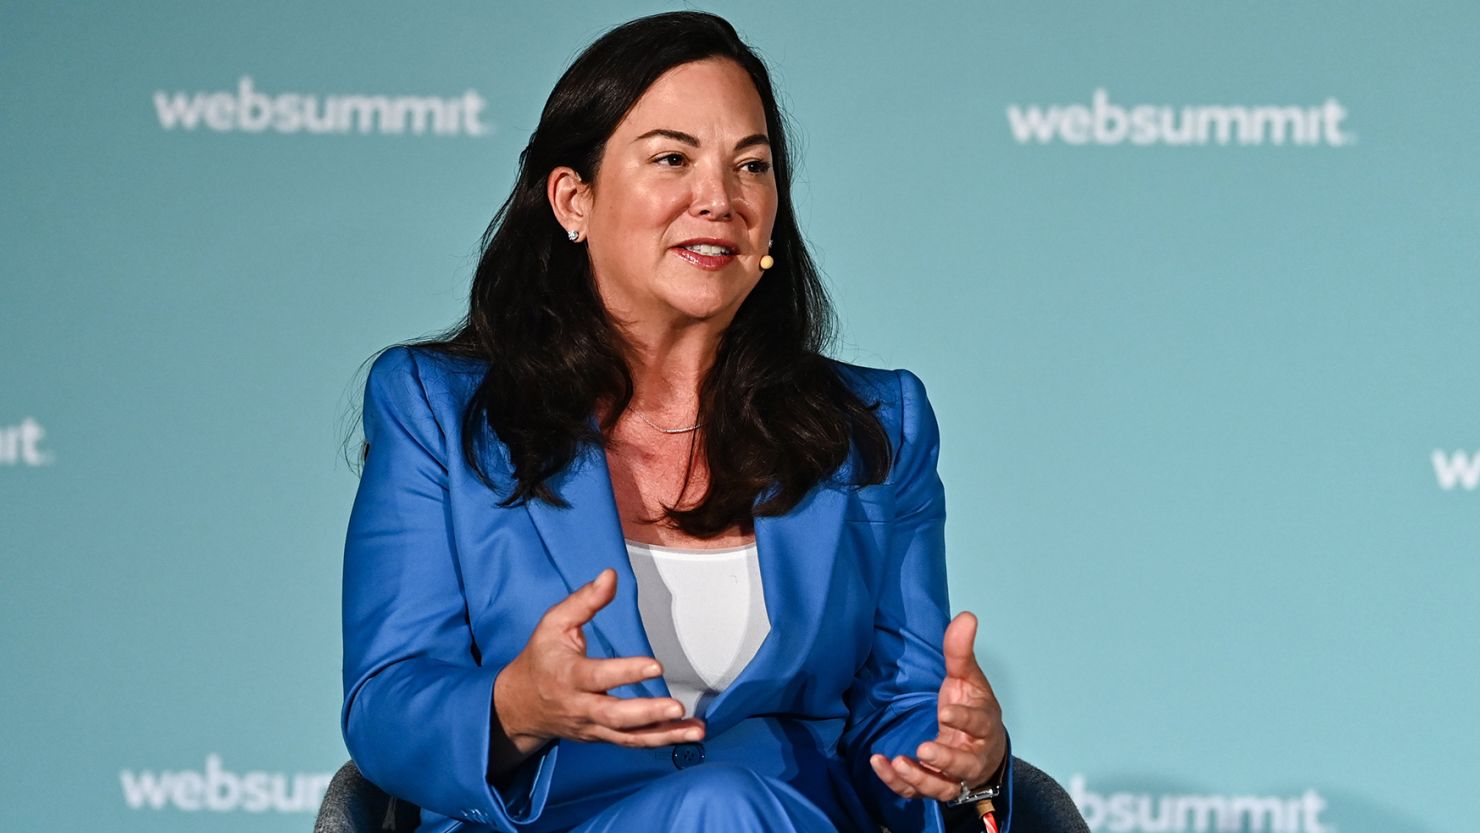 Jennifer Tejada, CEO of PagerDuty, on stage at Web Summit at the Altice Arena in Lisbon, Portugal in November 2022.